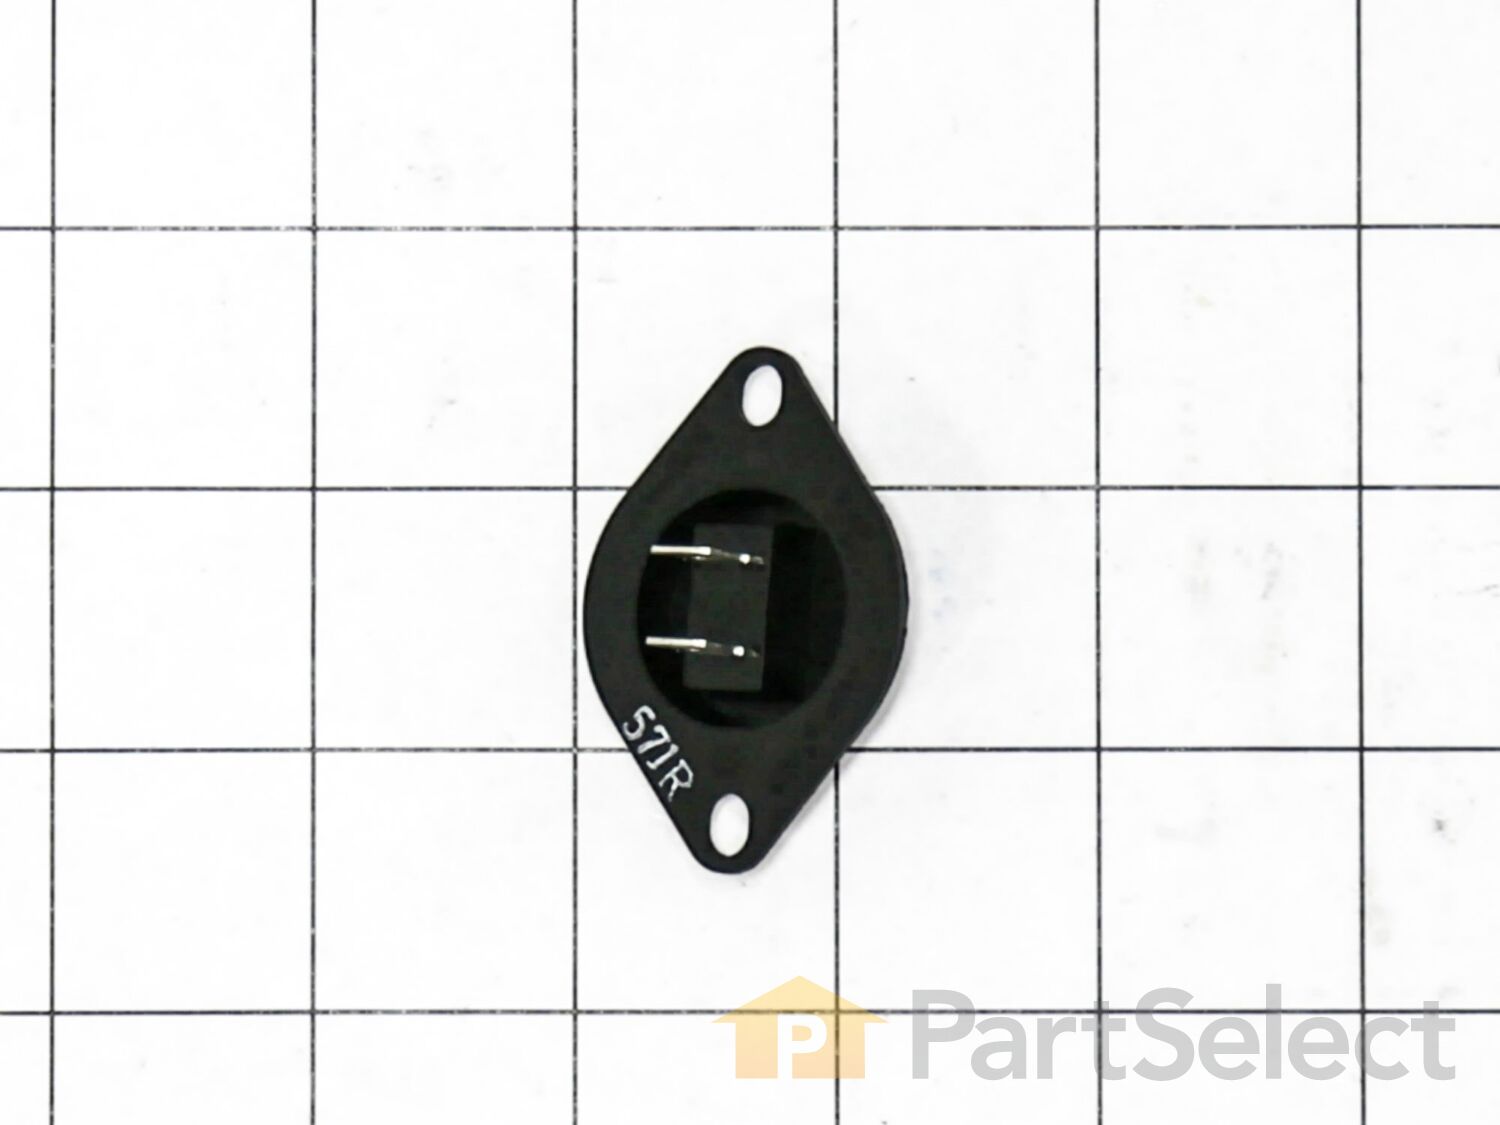 For Samsung Clothes Dryer Thermistor Part Number Model # PR6171024PASG930 